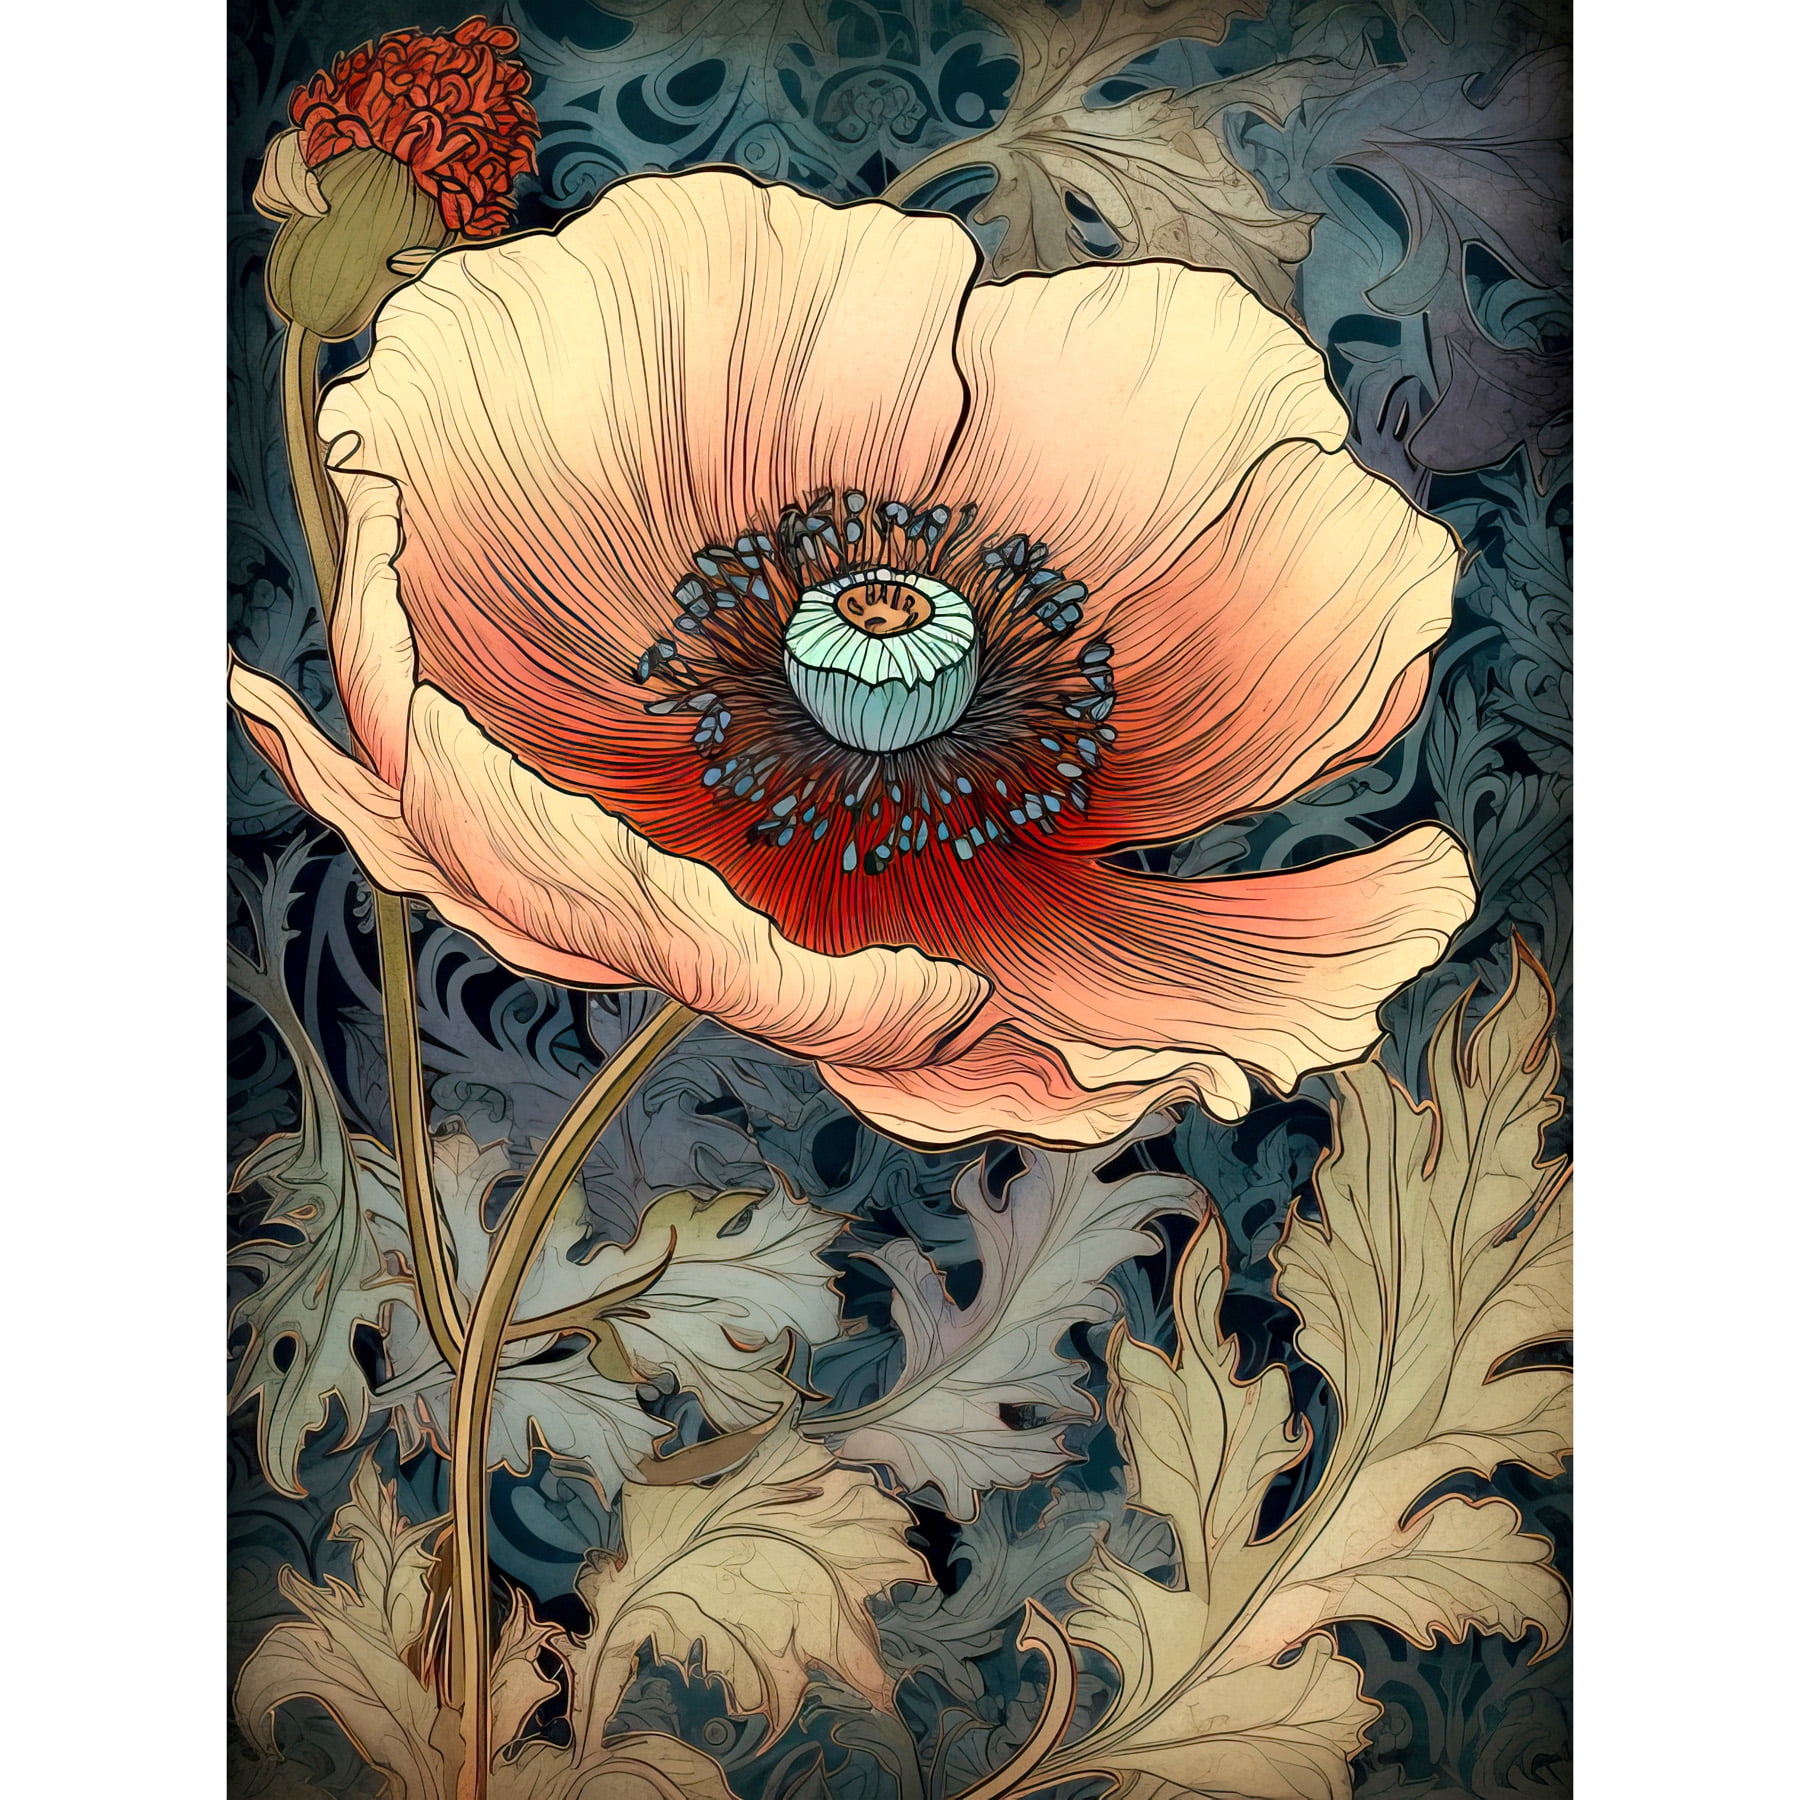 Anemone Flower Large Peach Art Print Inch Poster Morris Style Wall Bloom Thick 18X24 Paper William